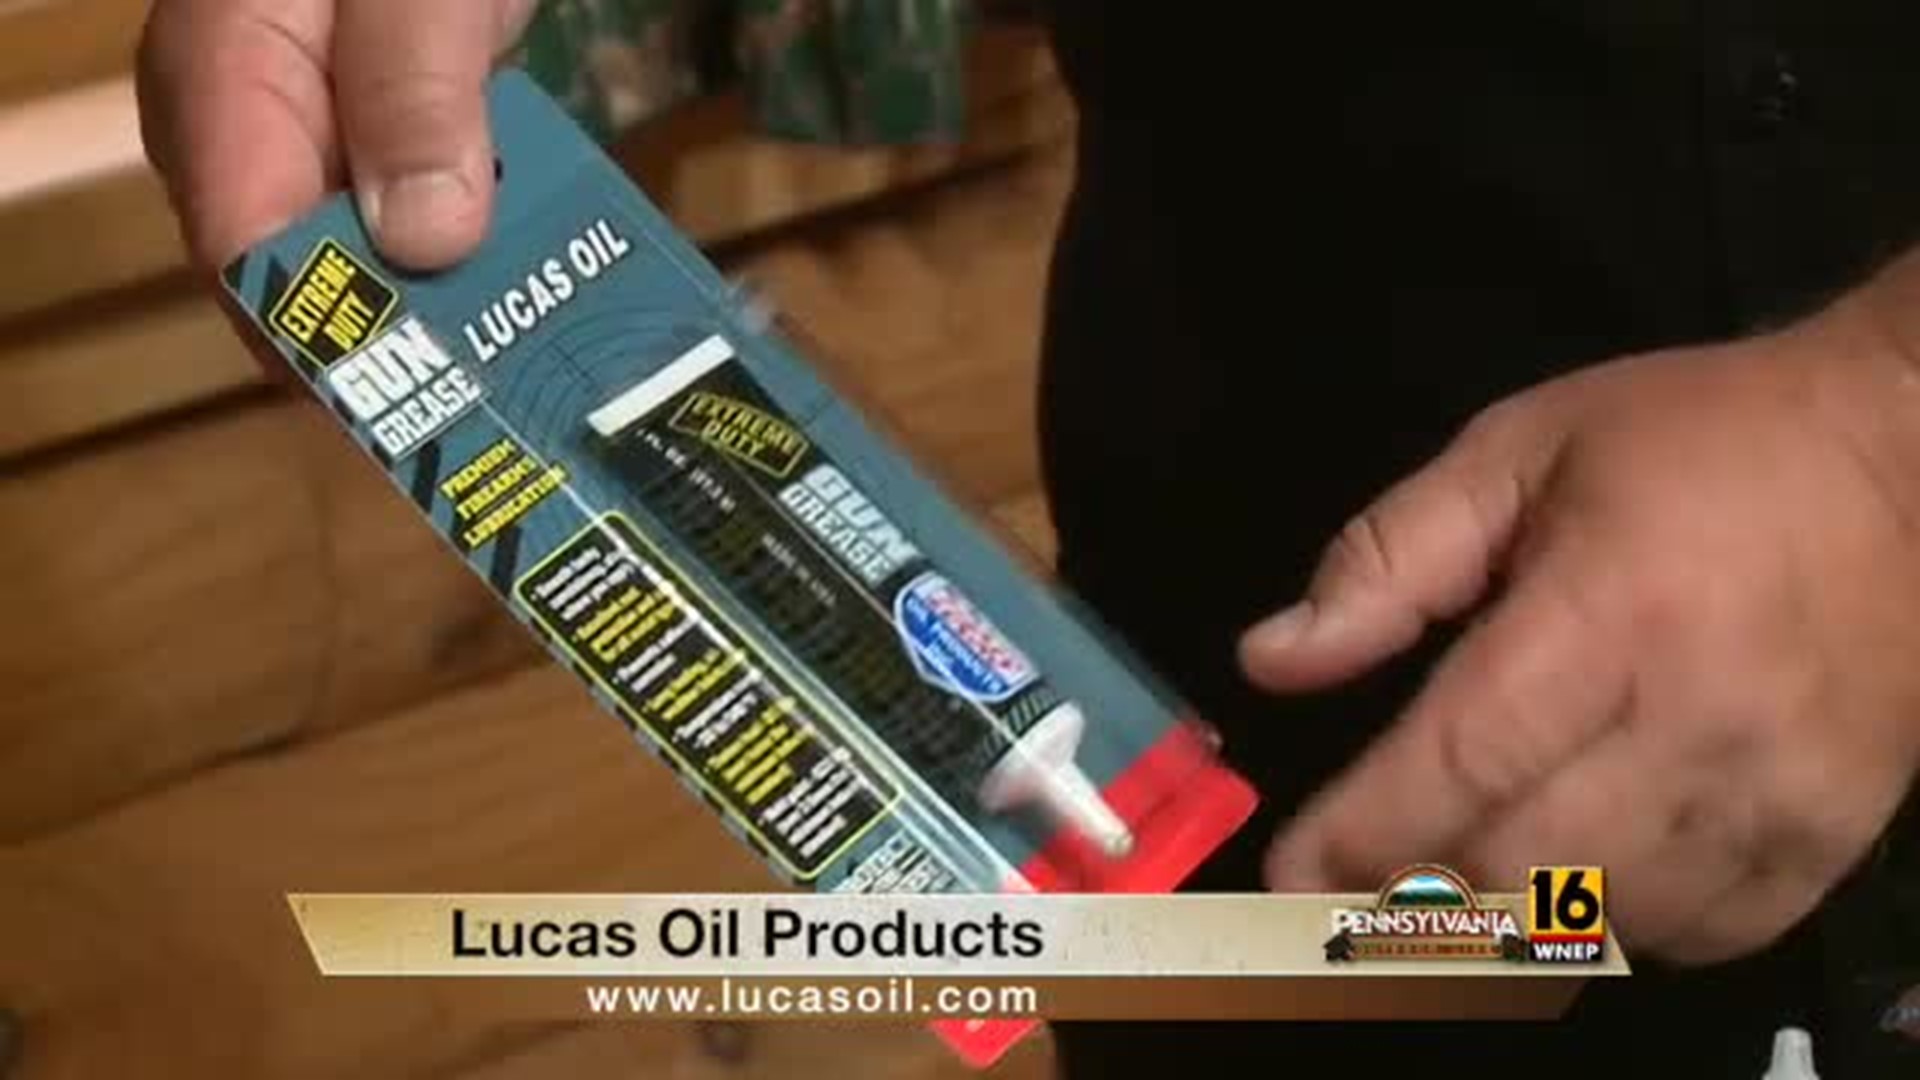 Lucas Oil Product Giveaway